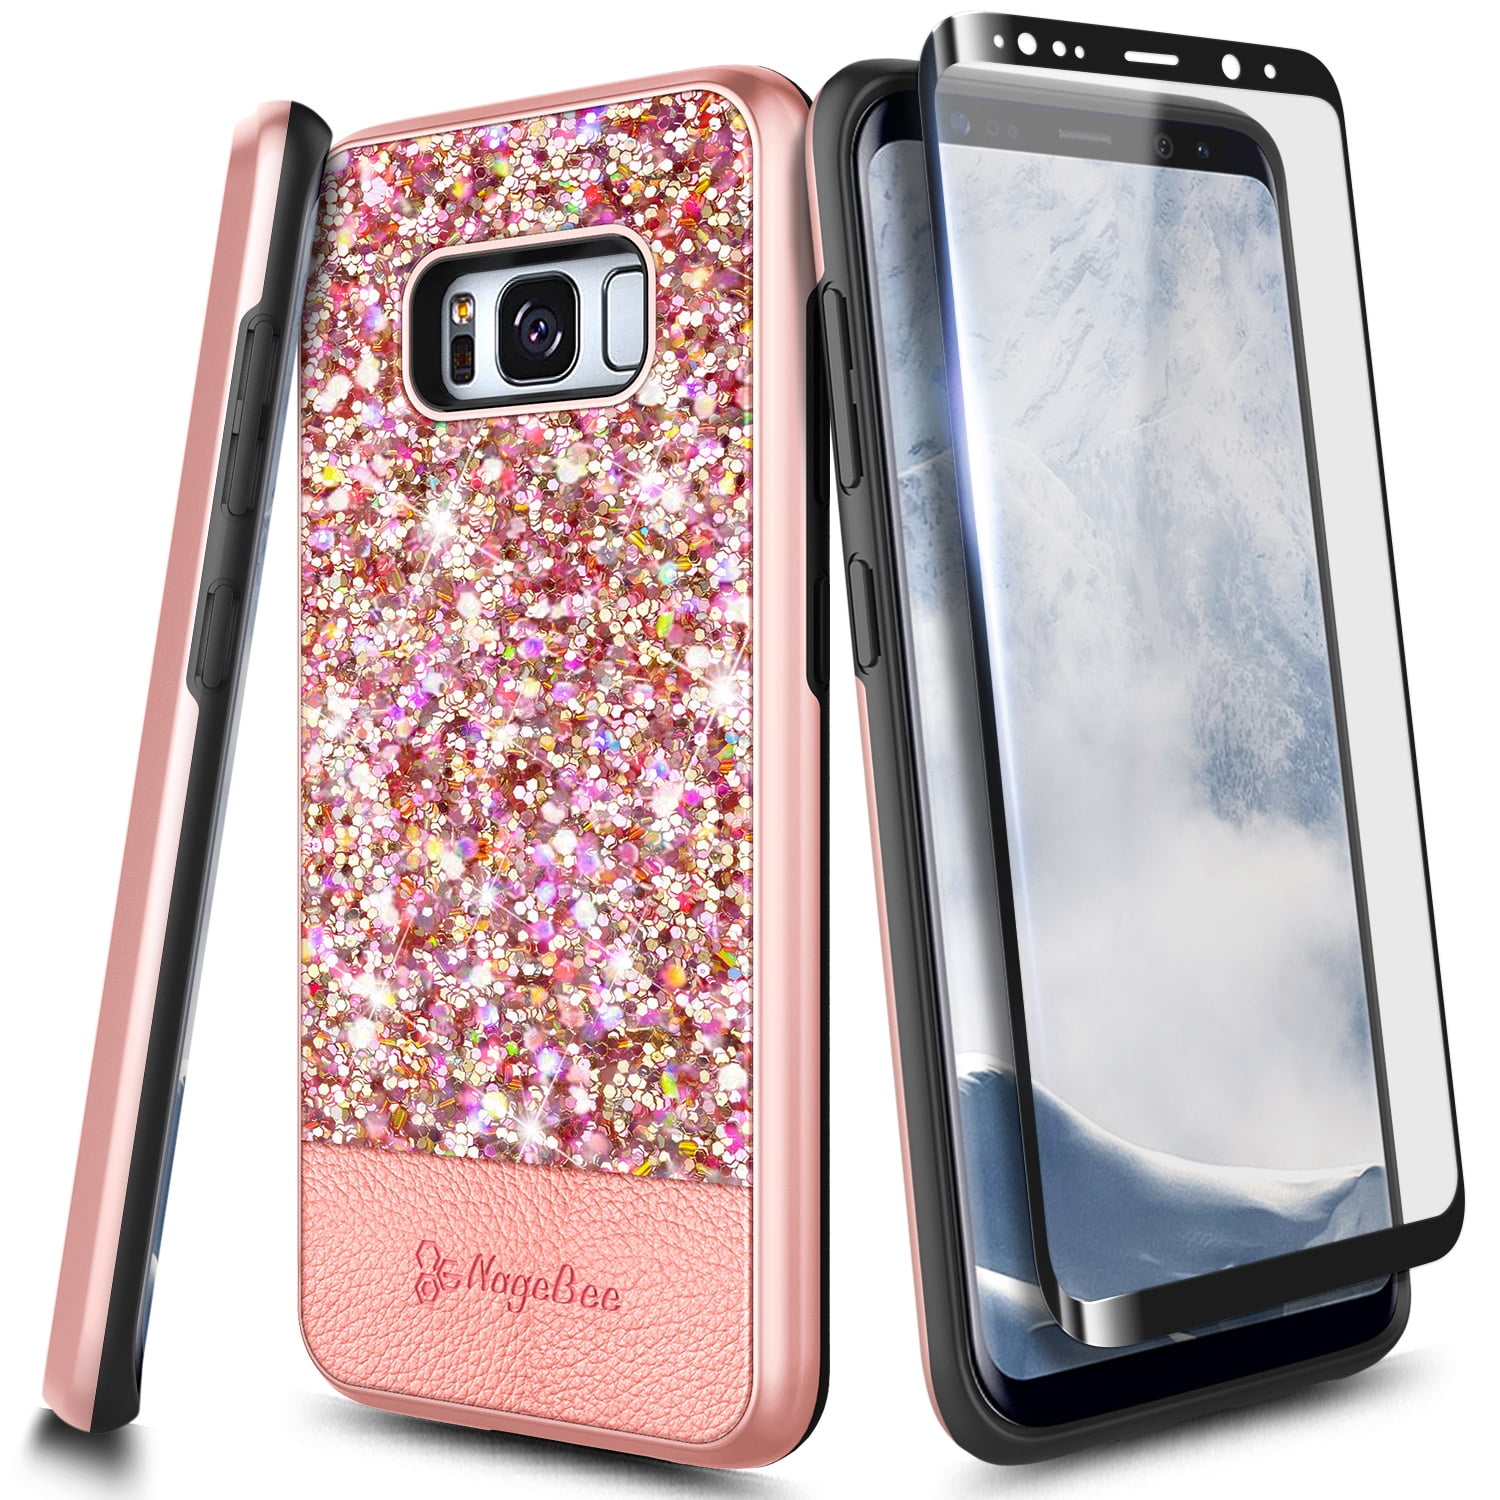 aften telegram afstemning For Samsung Galaxy S8 Plus Case With Tempered Glass Screen Protector (Full  Coverage), Glitter Sparkle Bling Leather Protective Shockproof, Cute Phone Case  Cover for Women Girls (Rose Gold) - Walmart.com